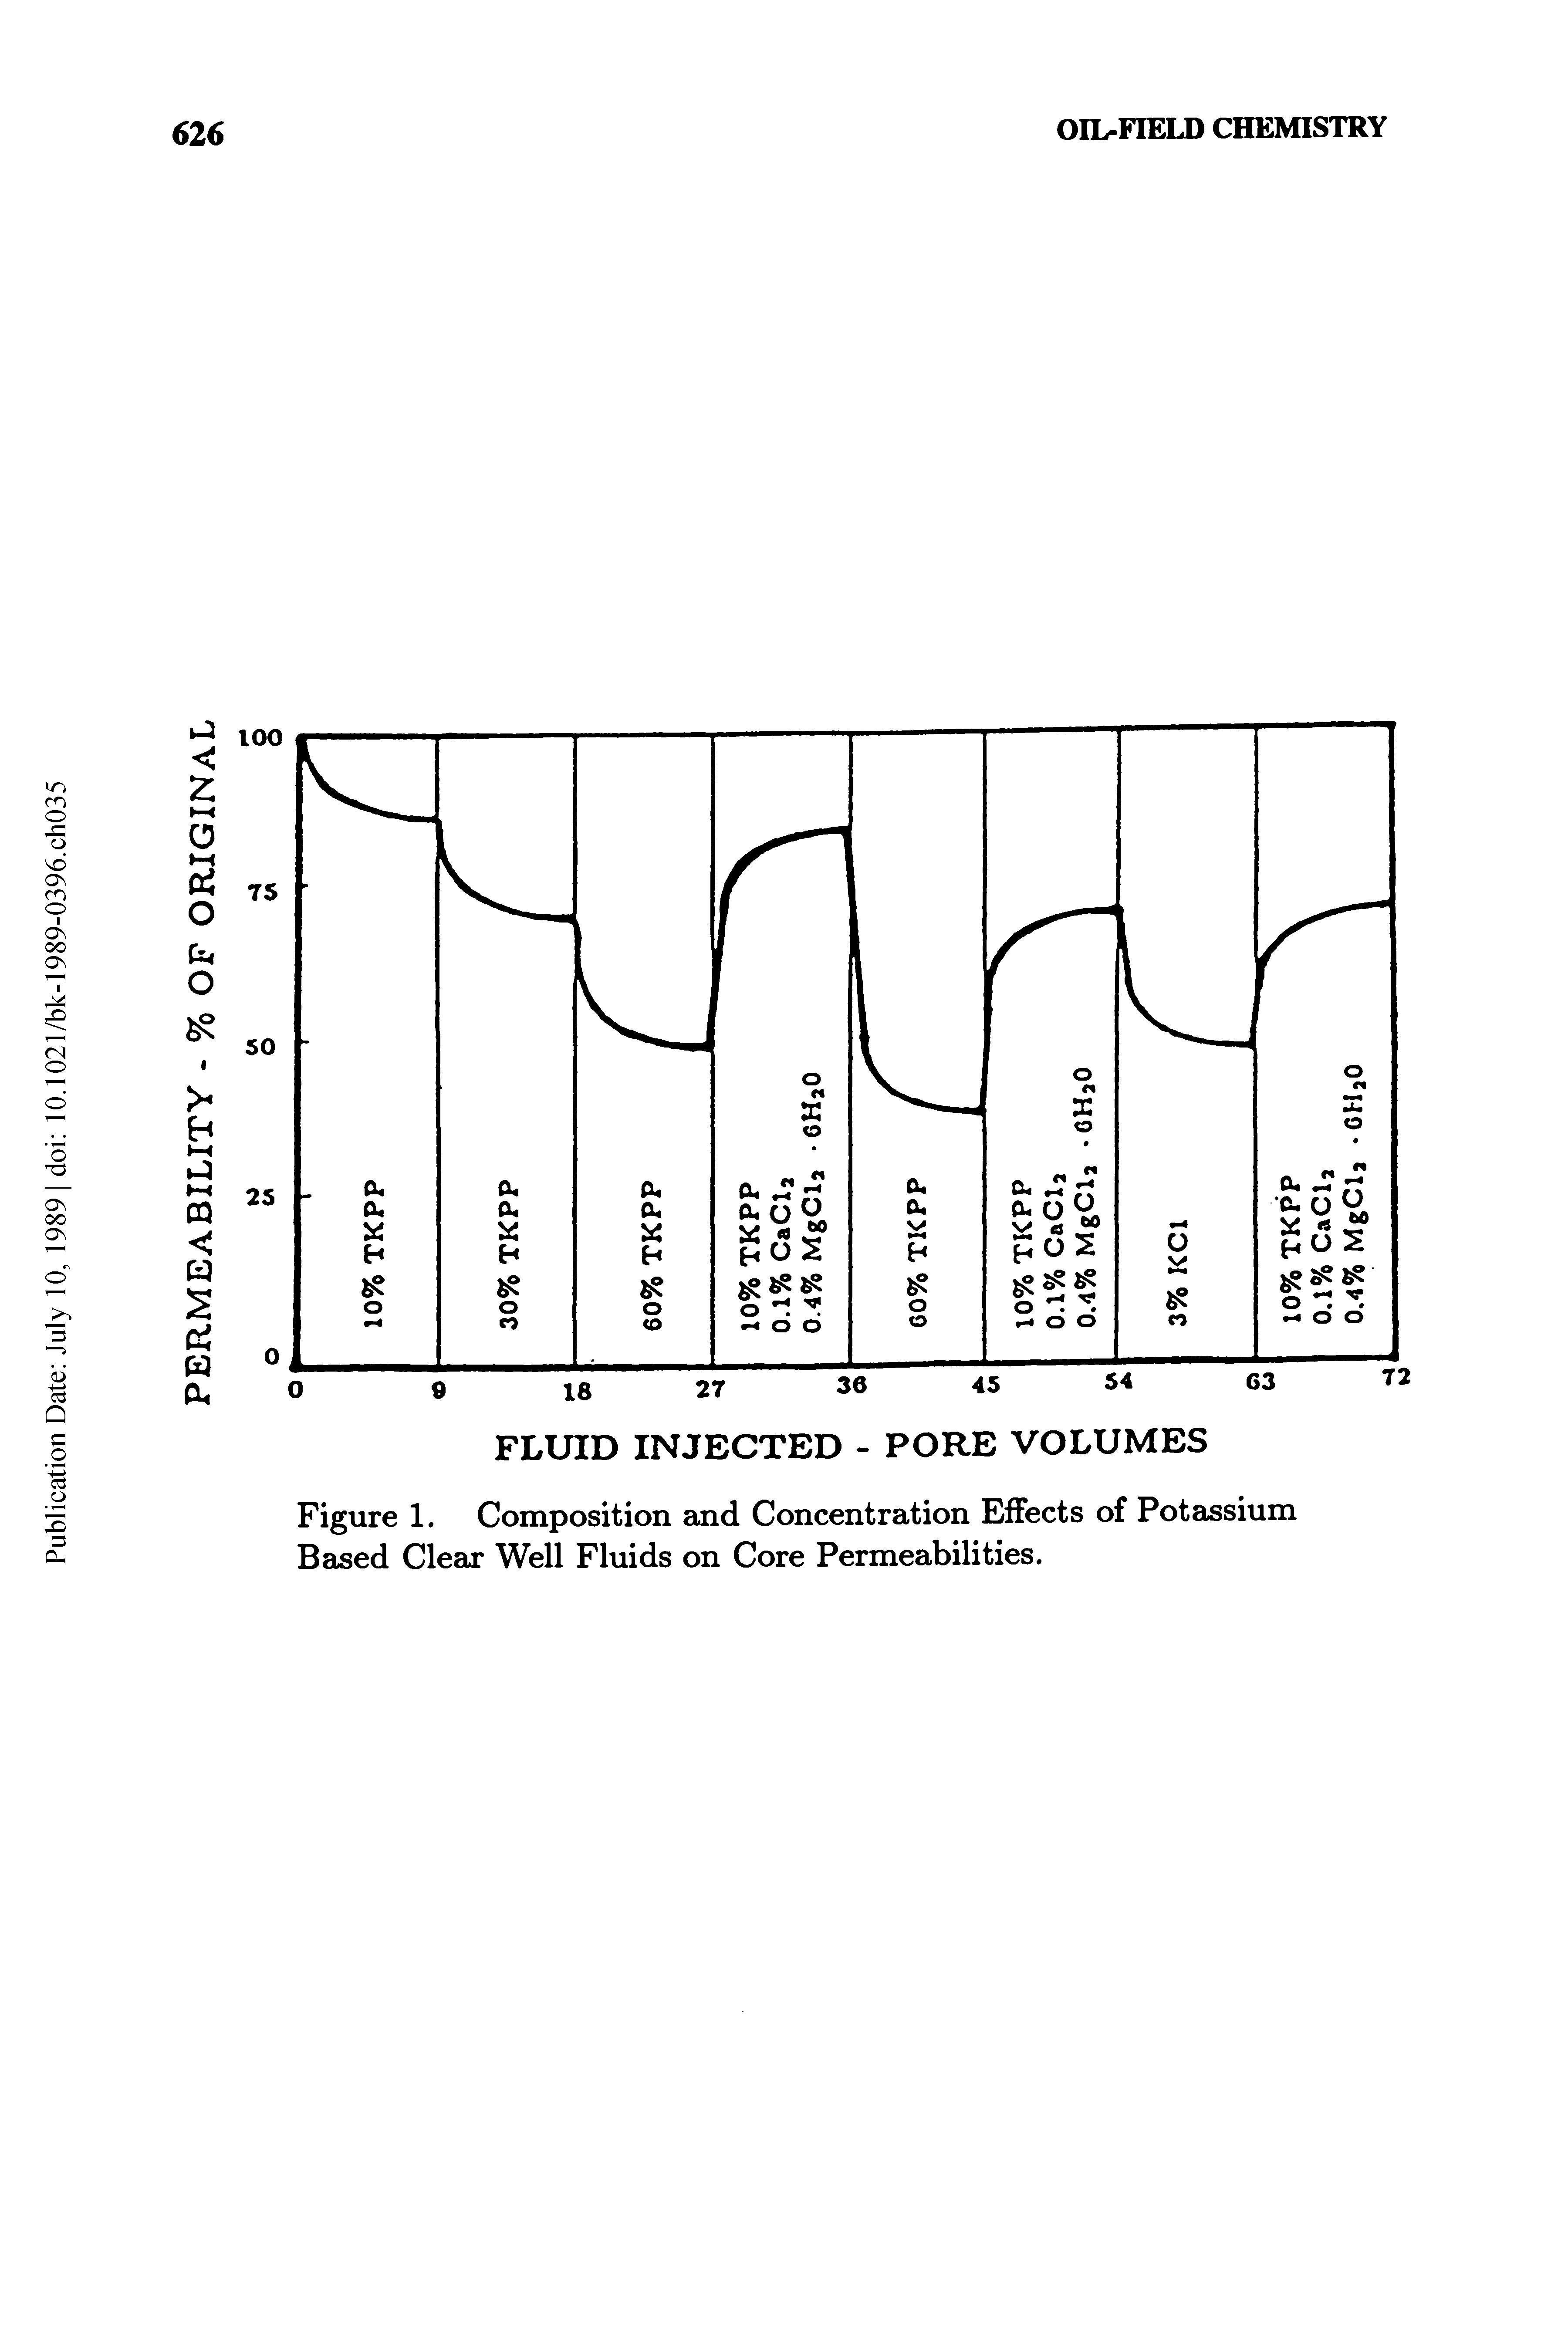 Figure 1. Composition and Concentration Effects of Potassium Based Clear Well Fluids on Core Permeabilities.